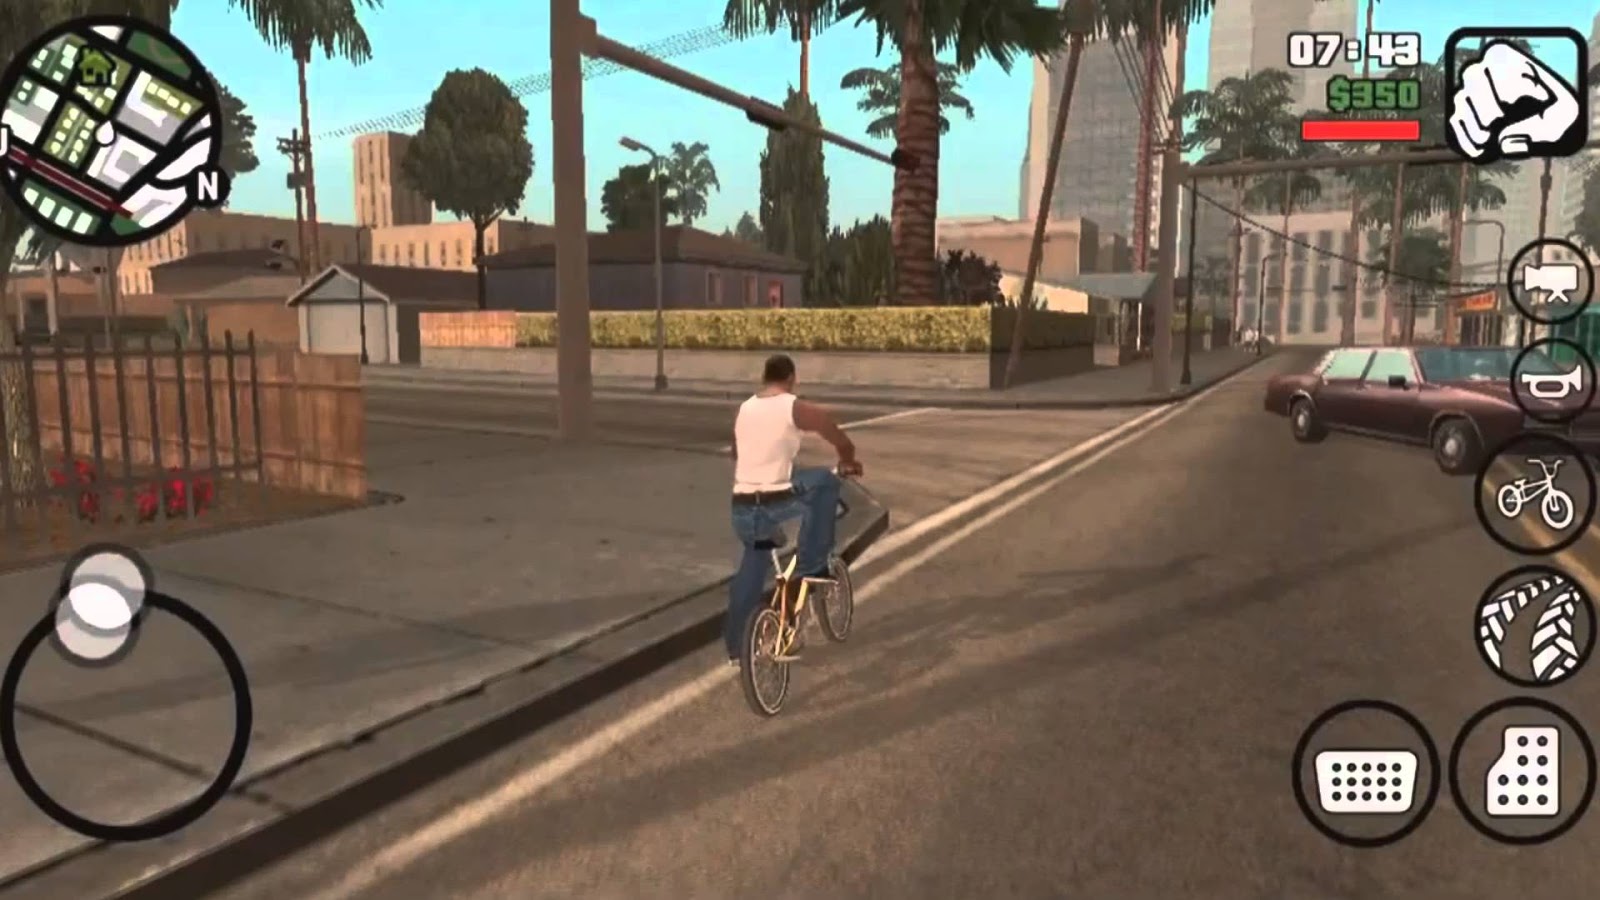 Download Gta San Andreas For Android Apk Mania